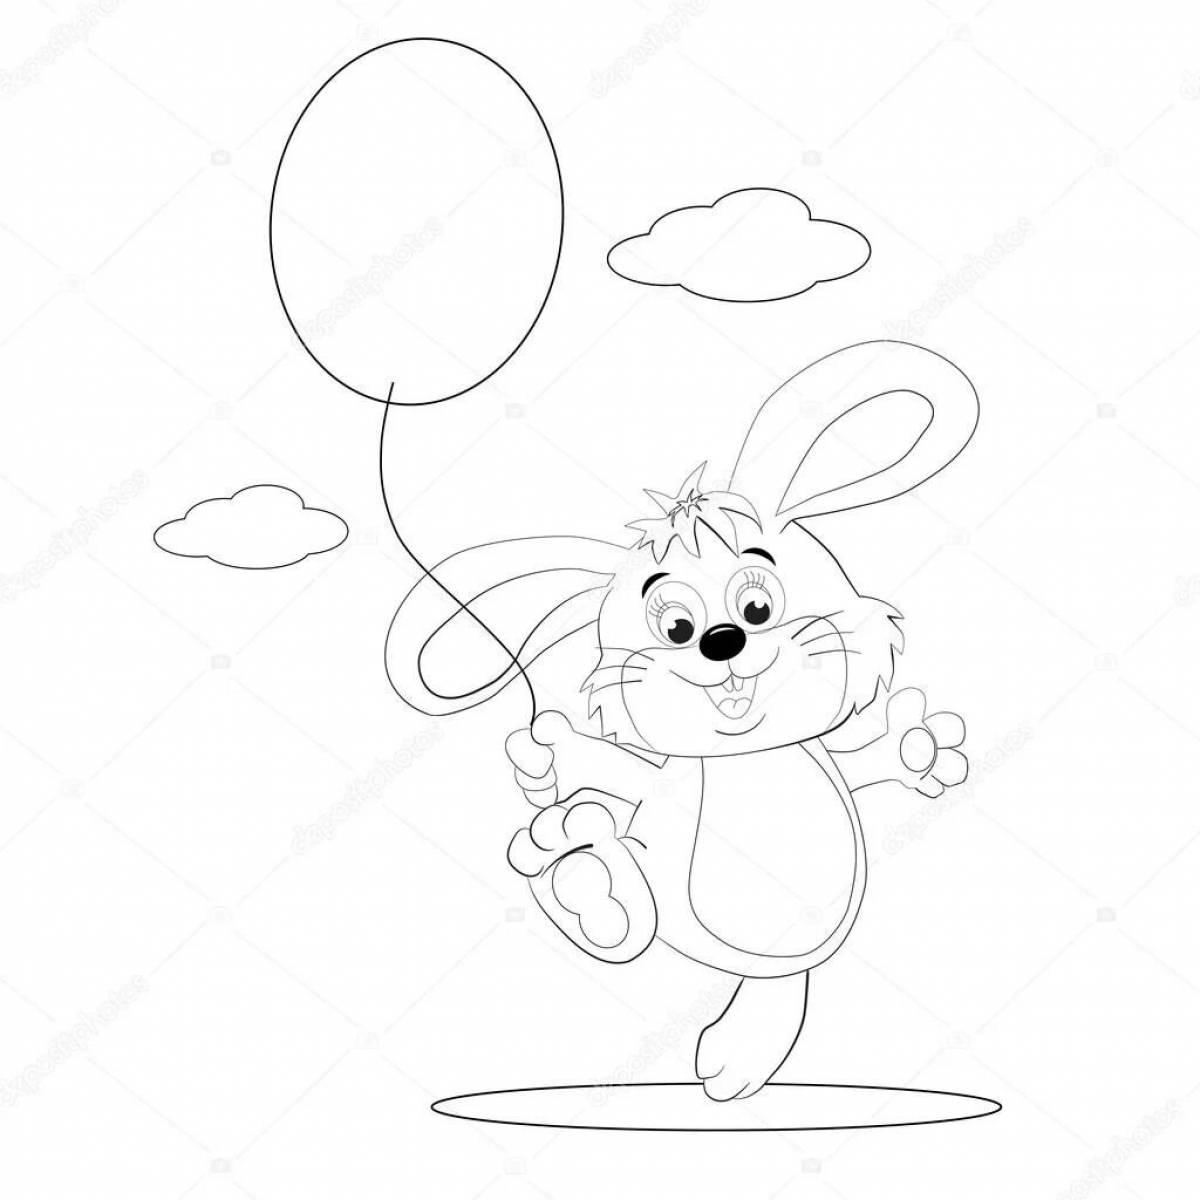 Bunny with balloons #4